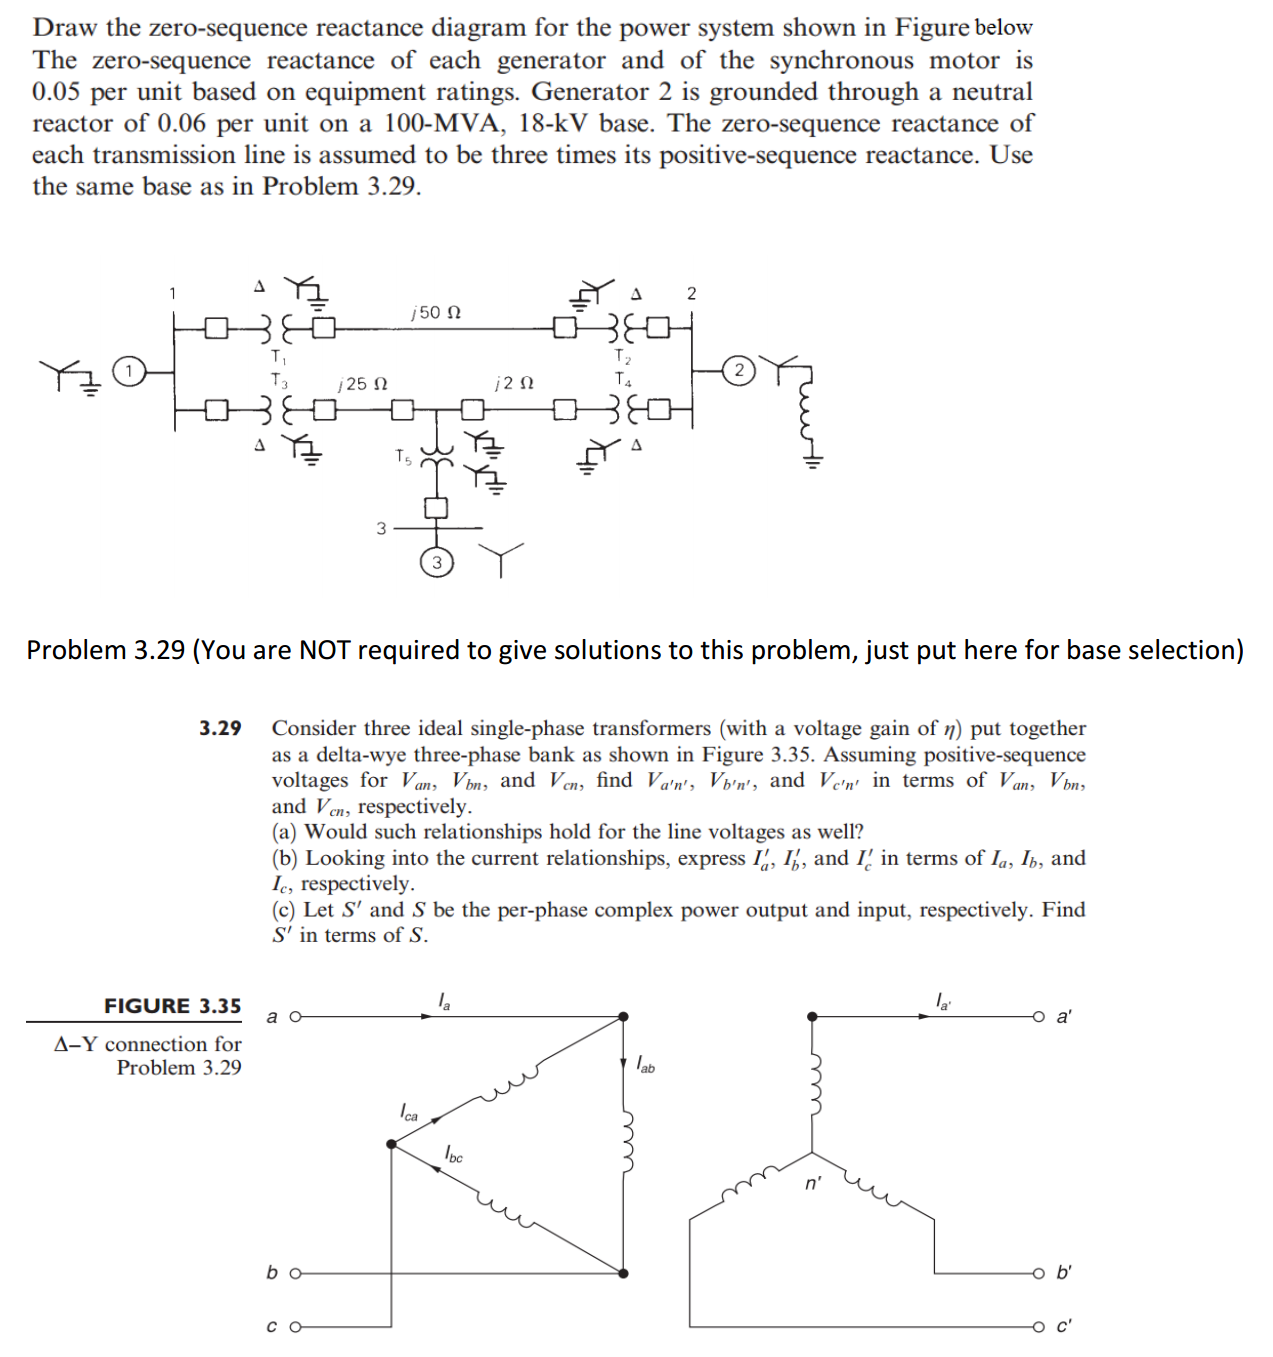 Solved: Draw The Zero-sequence Reactance Diagram For The P ...